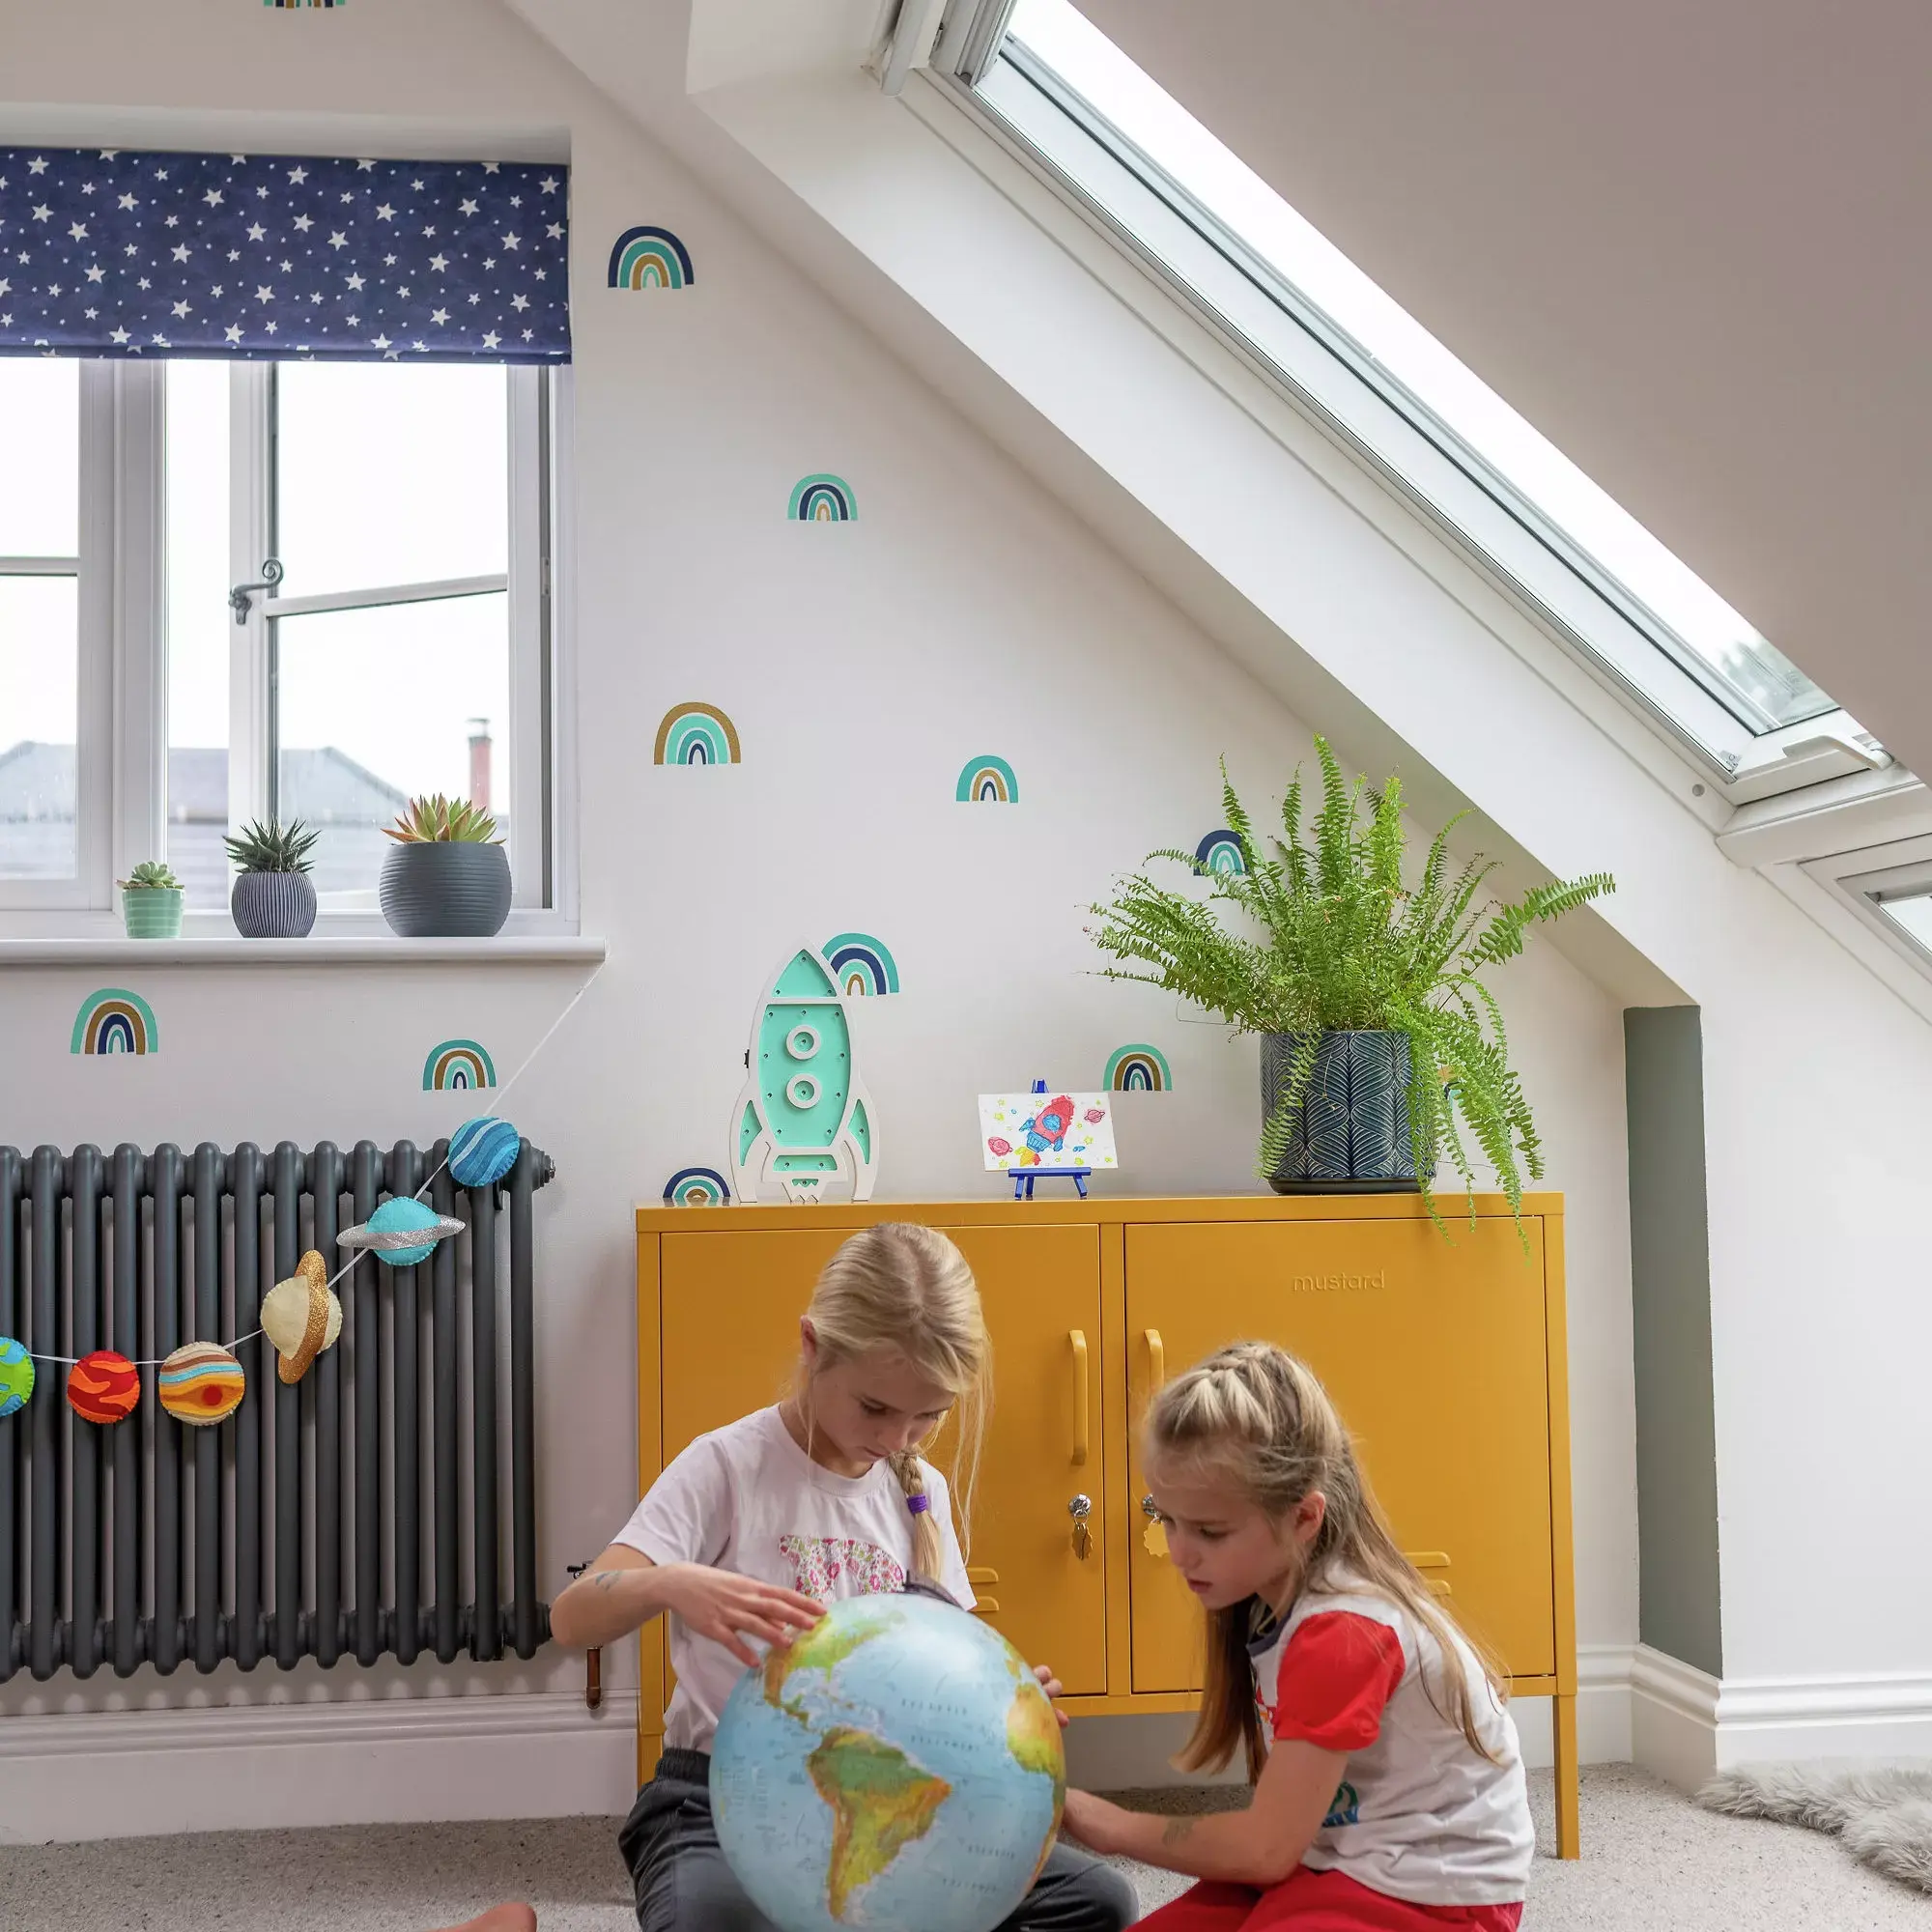 Children playing in room with VELUX roof windows